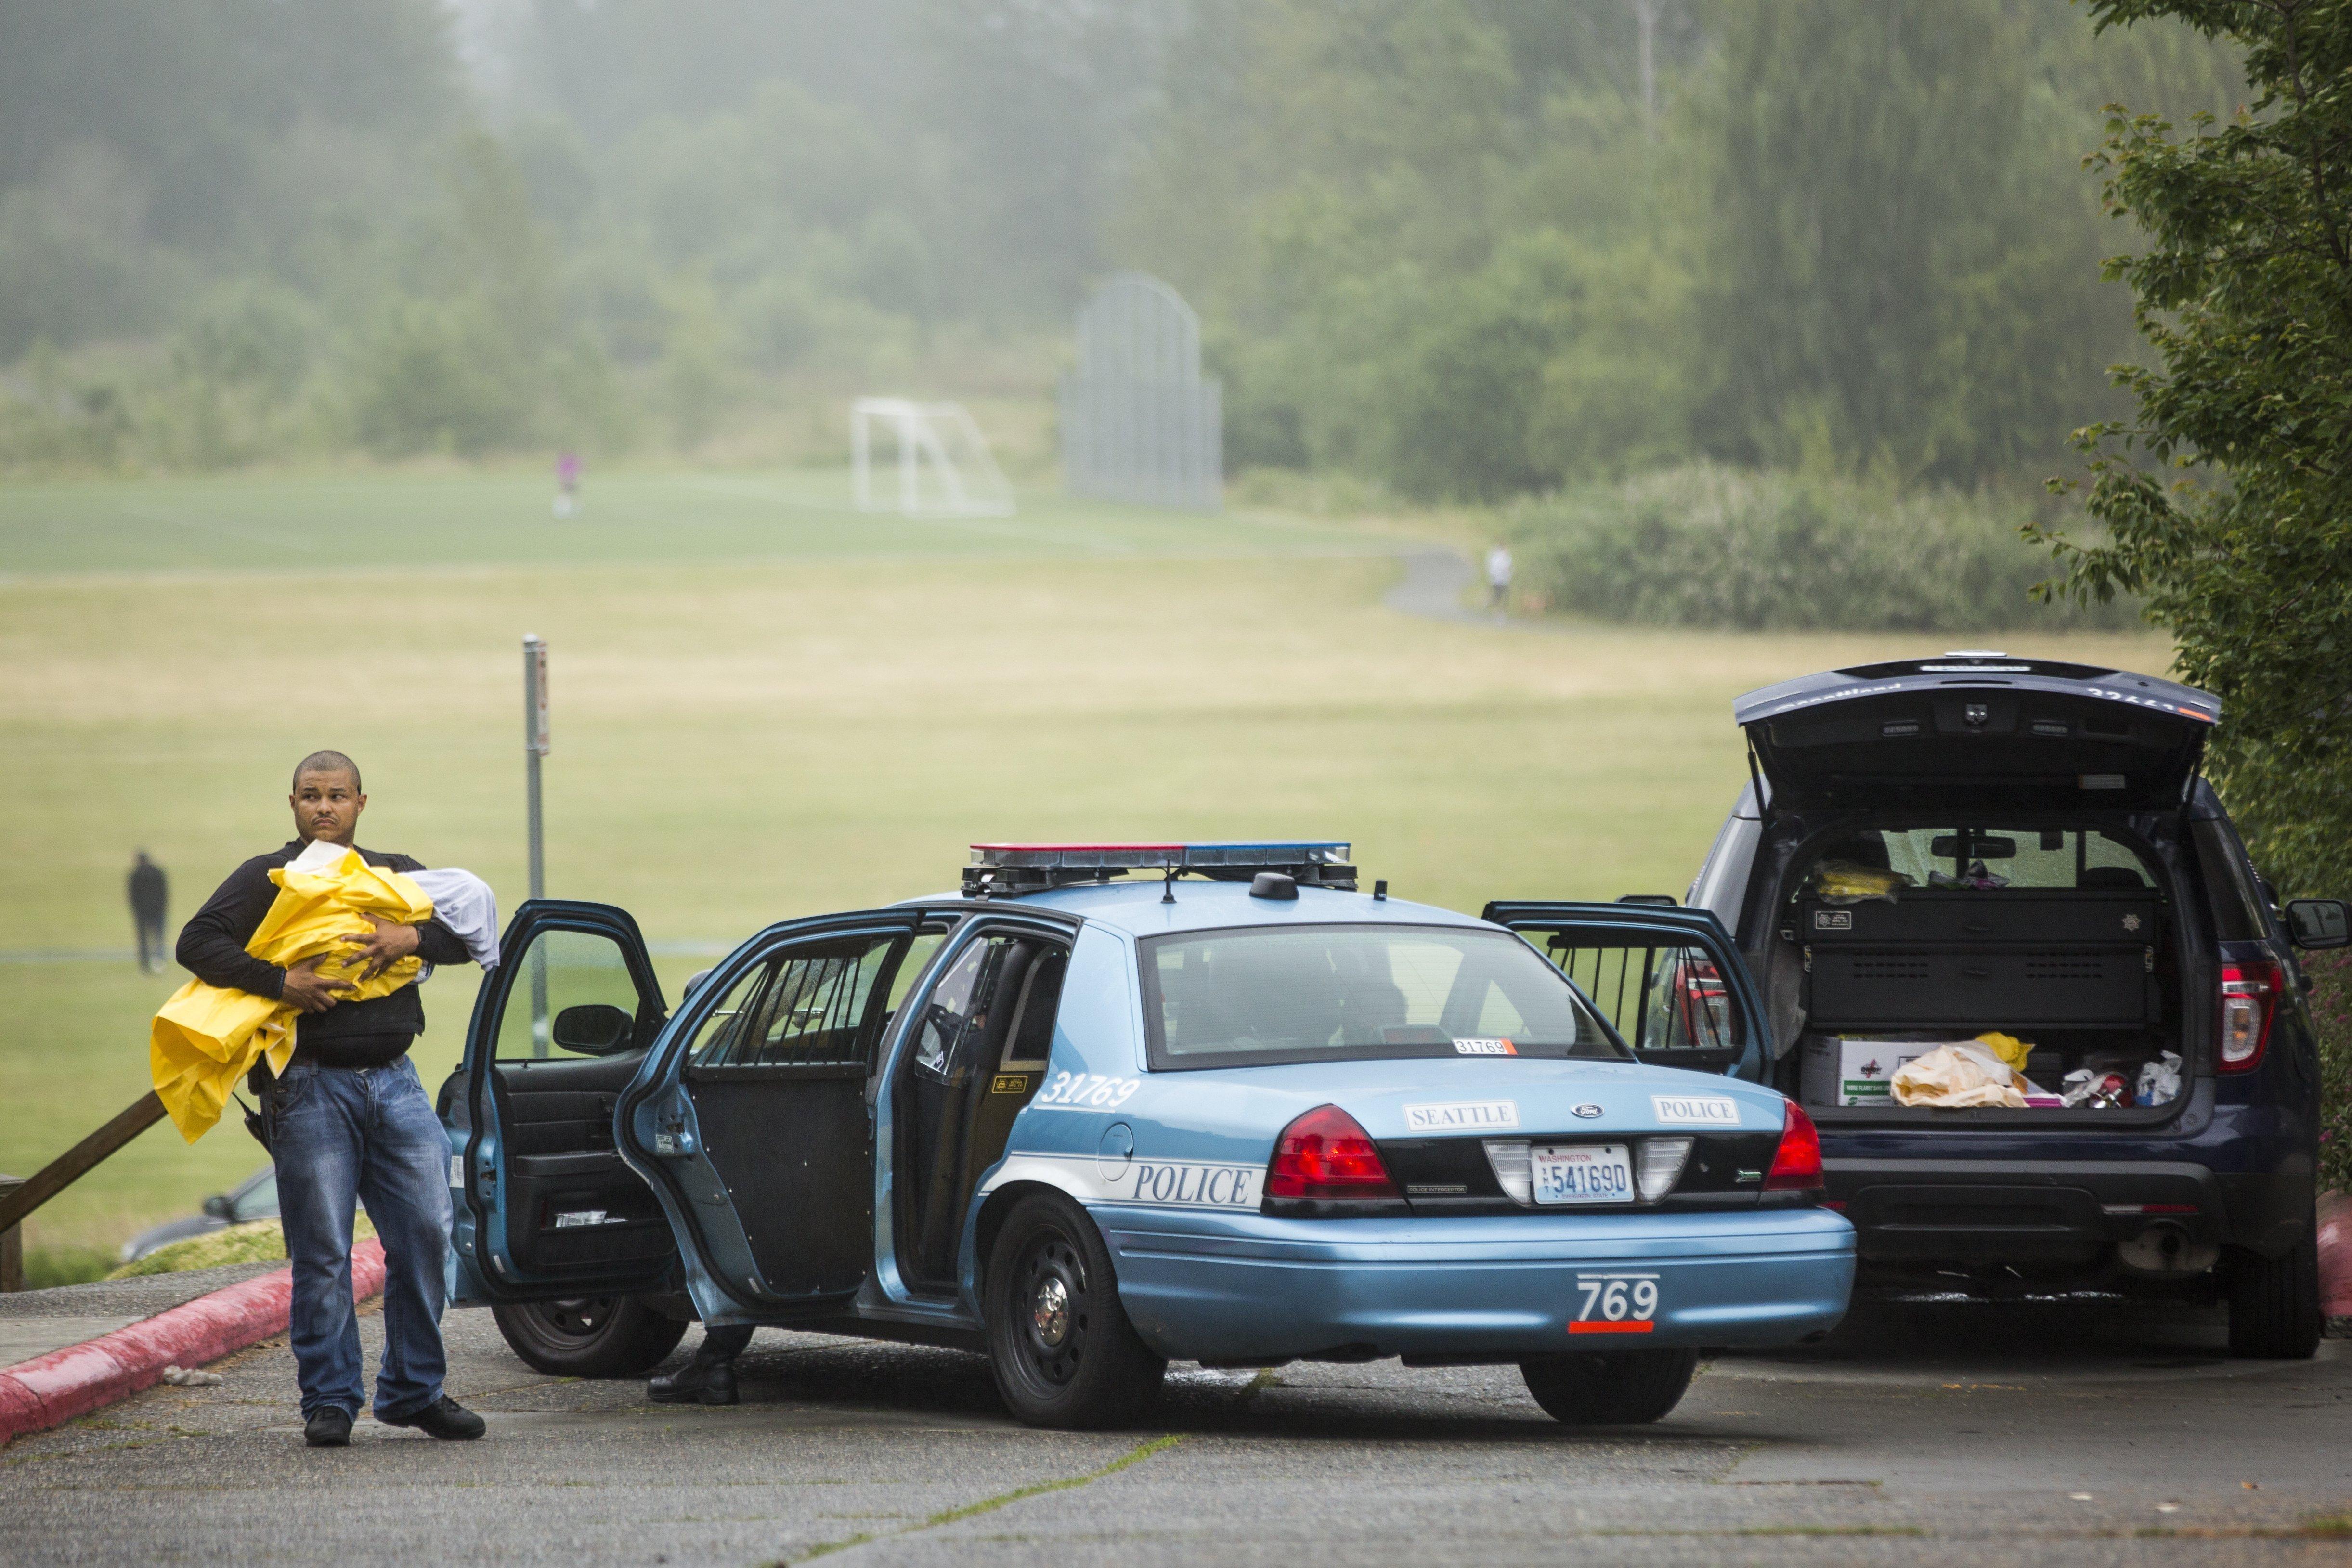 Seattle police shooting may show limits of crisis training | The Spokesman-Review